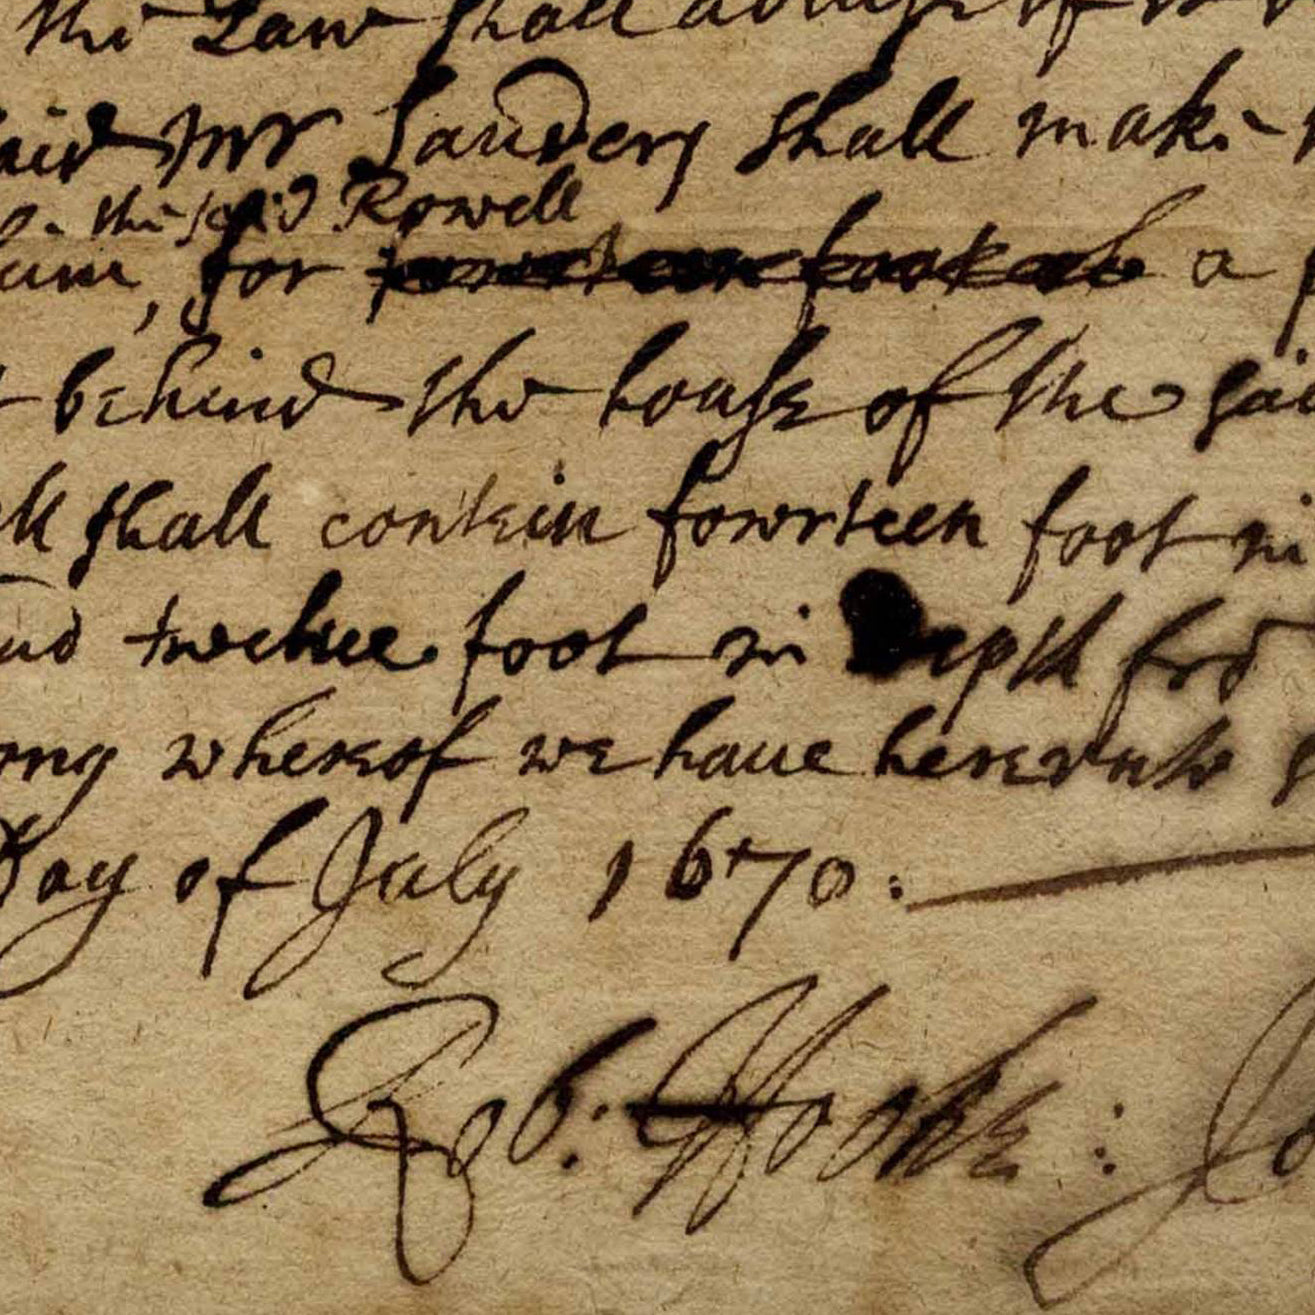 Robert Hooke Extremely Rare Signed Document with 1666 London Fire Associations Expected to Garner Over $50,000